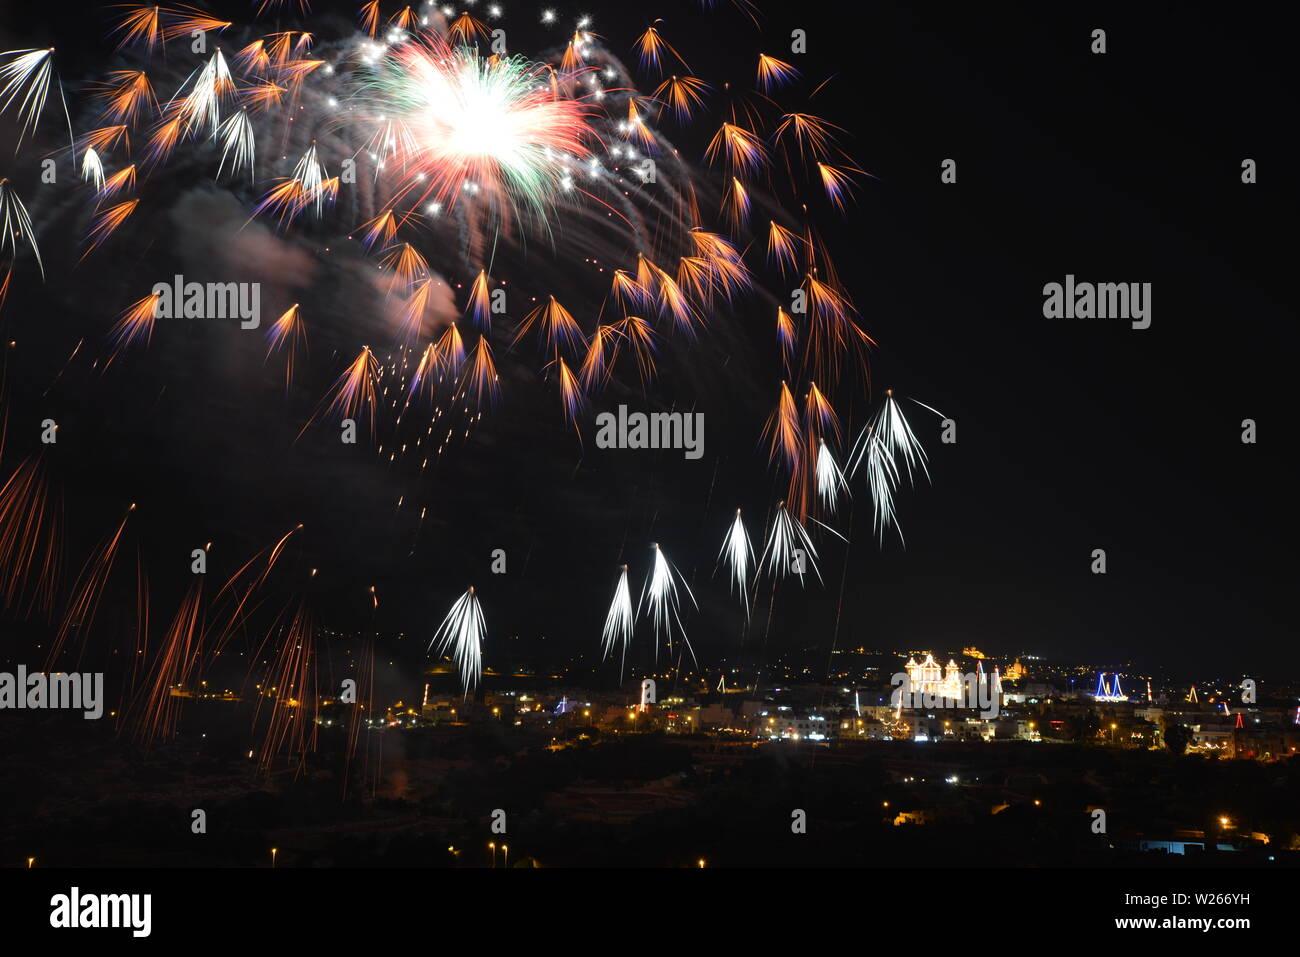 Beautiful fireworks at the Qrendi, Malta village feast in August Stock Photo